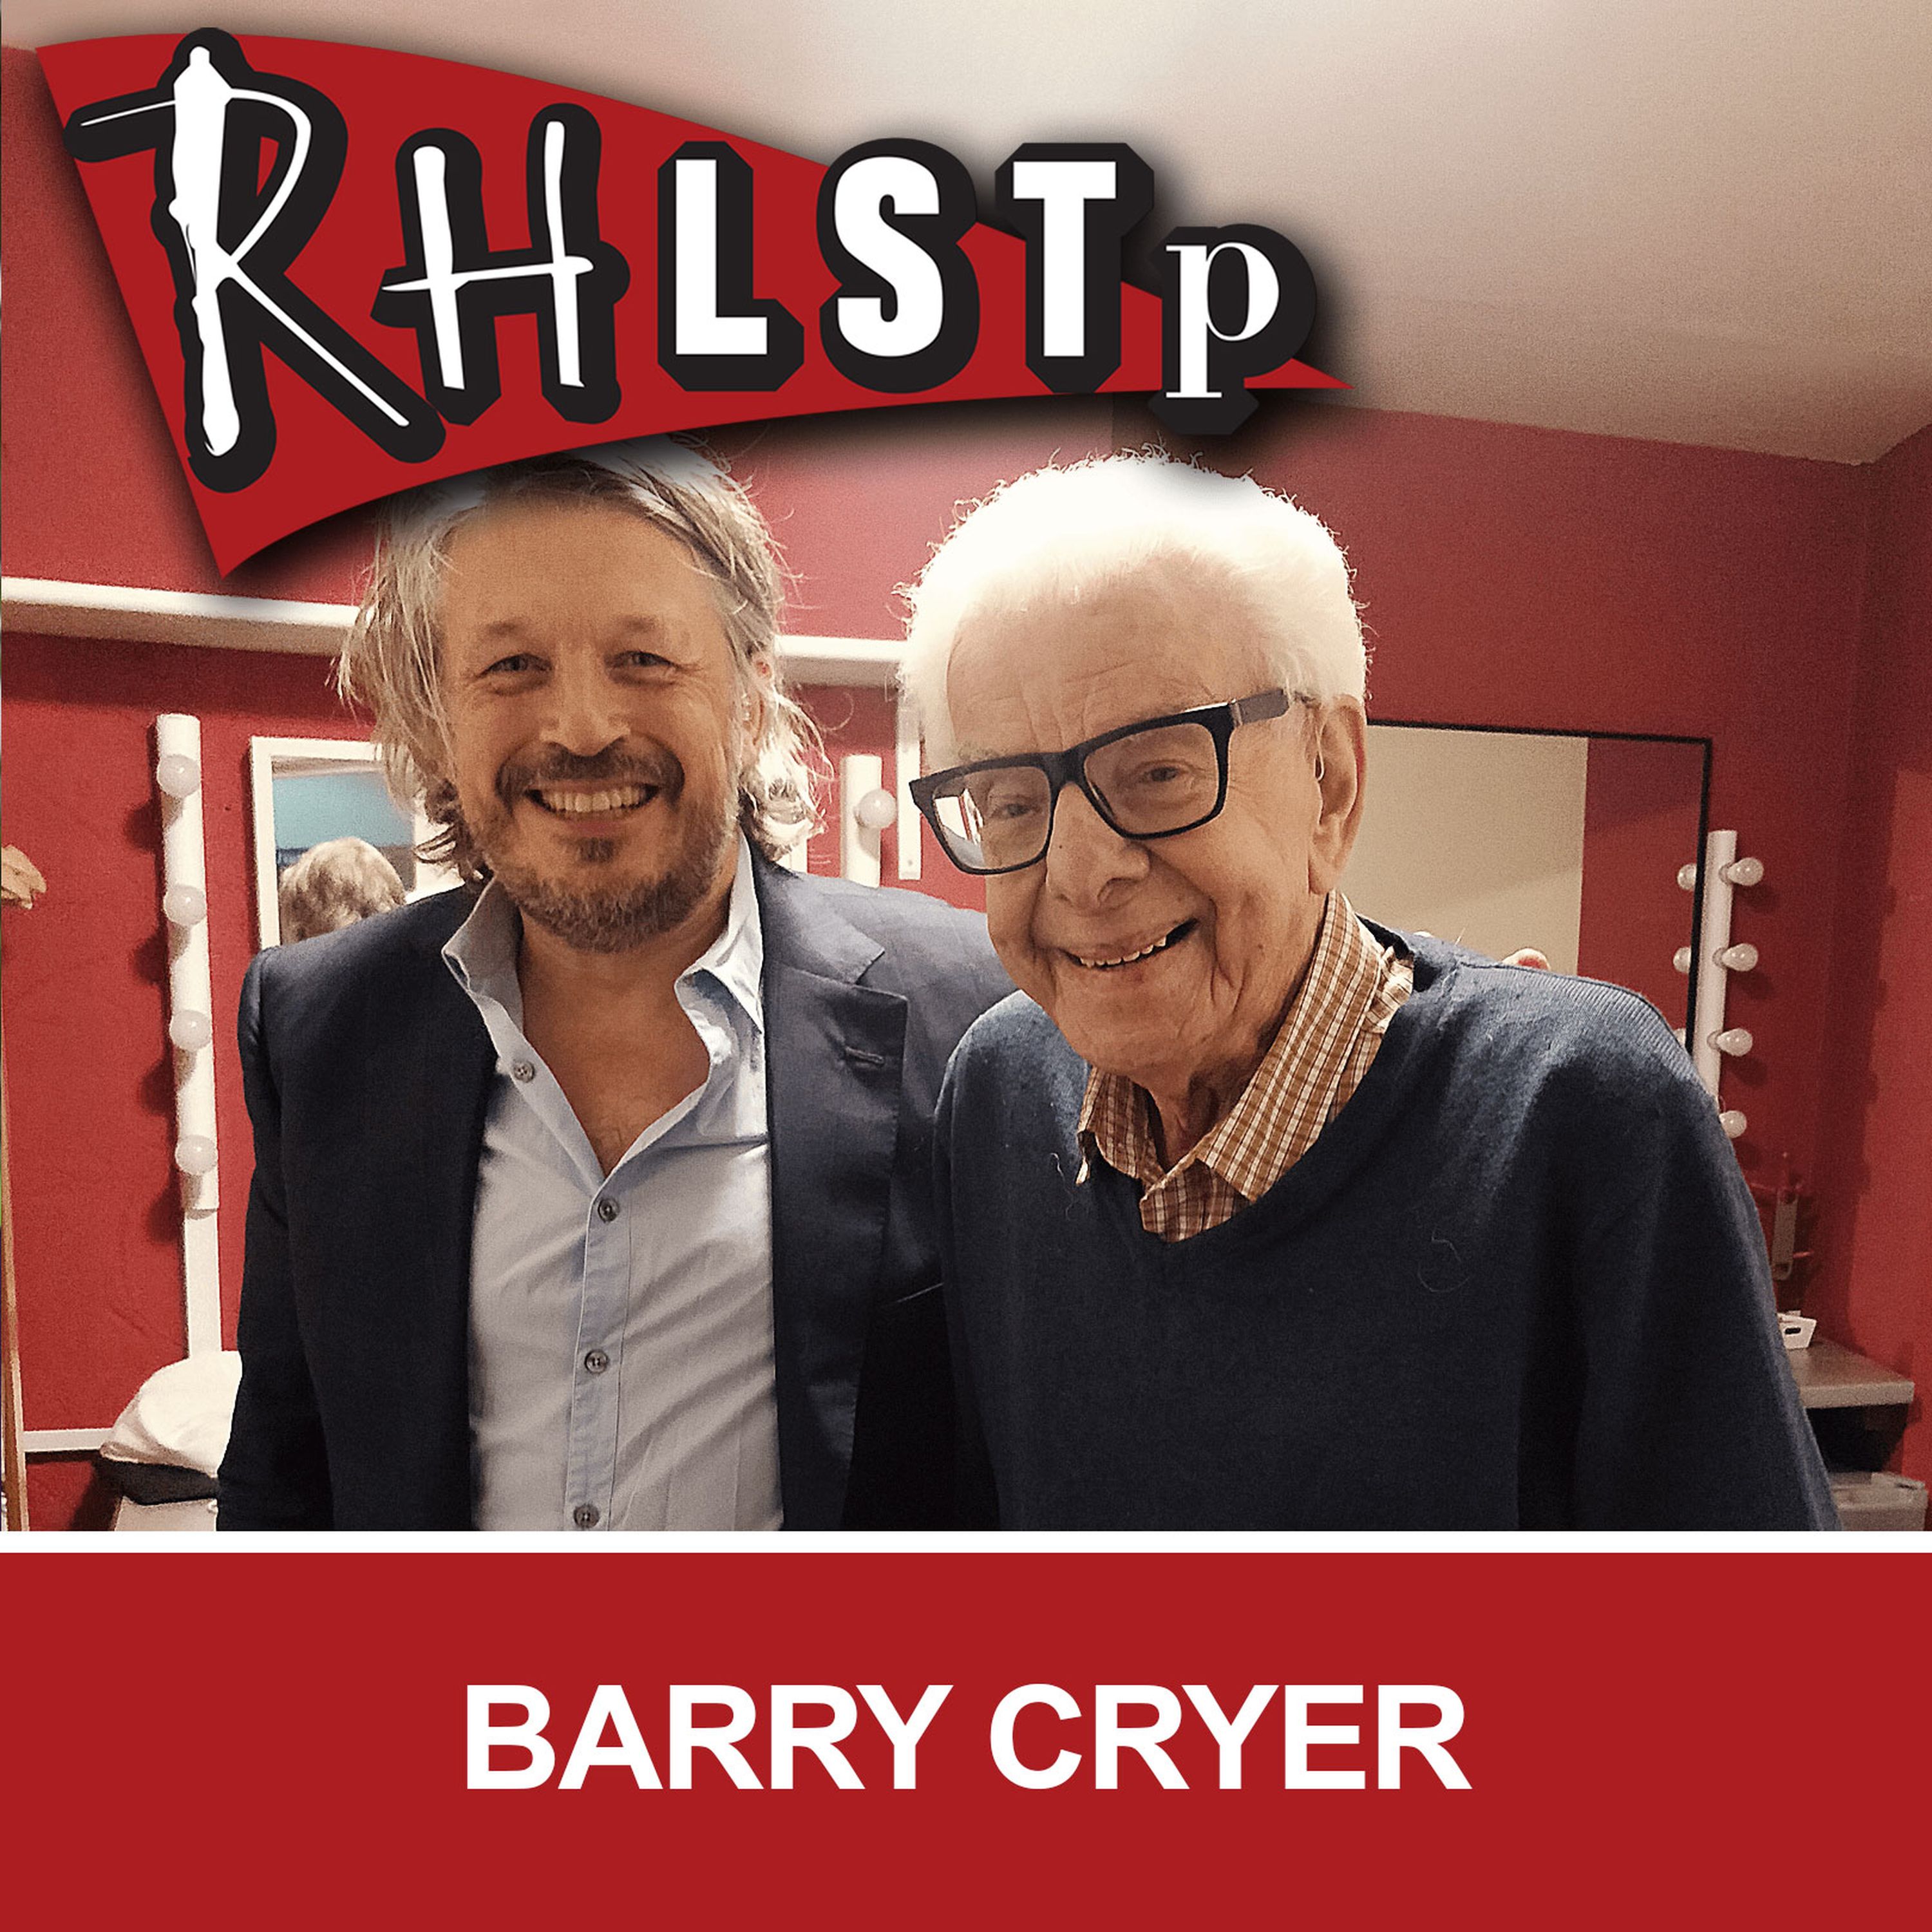 Barry Cryer’s Joke About a Little Old Lady on the Train